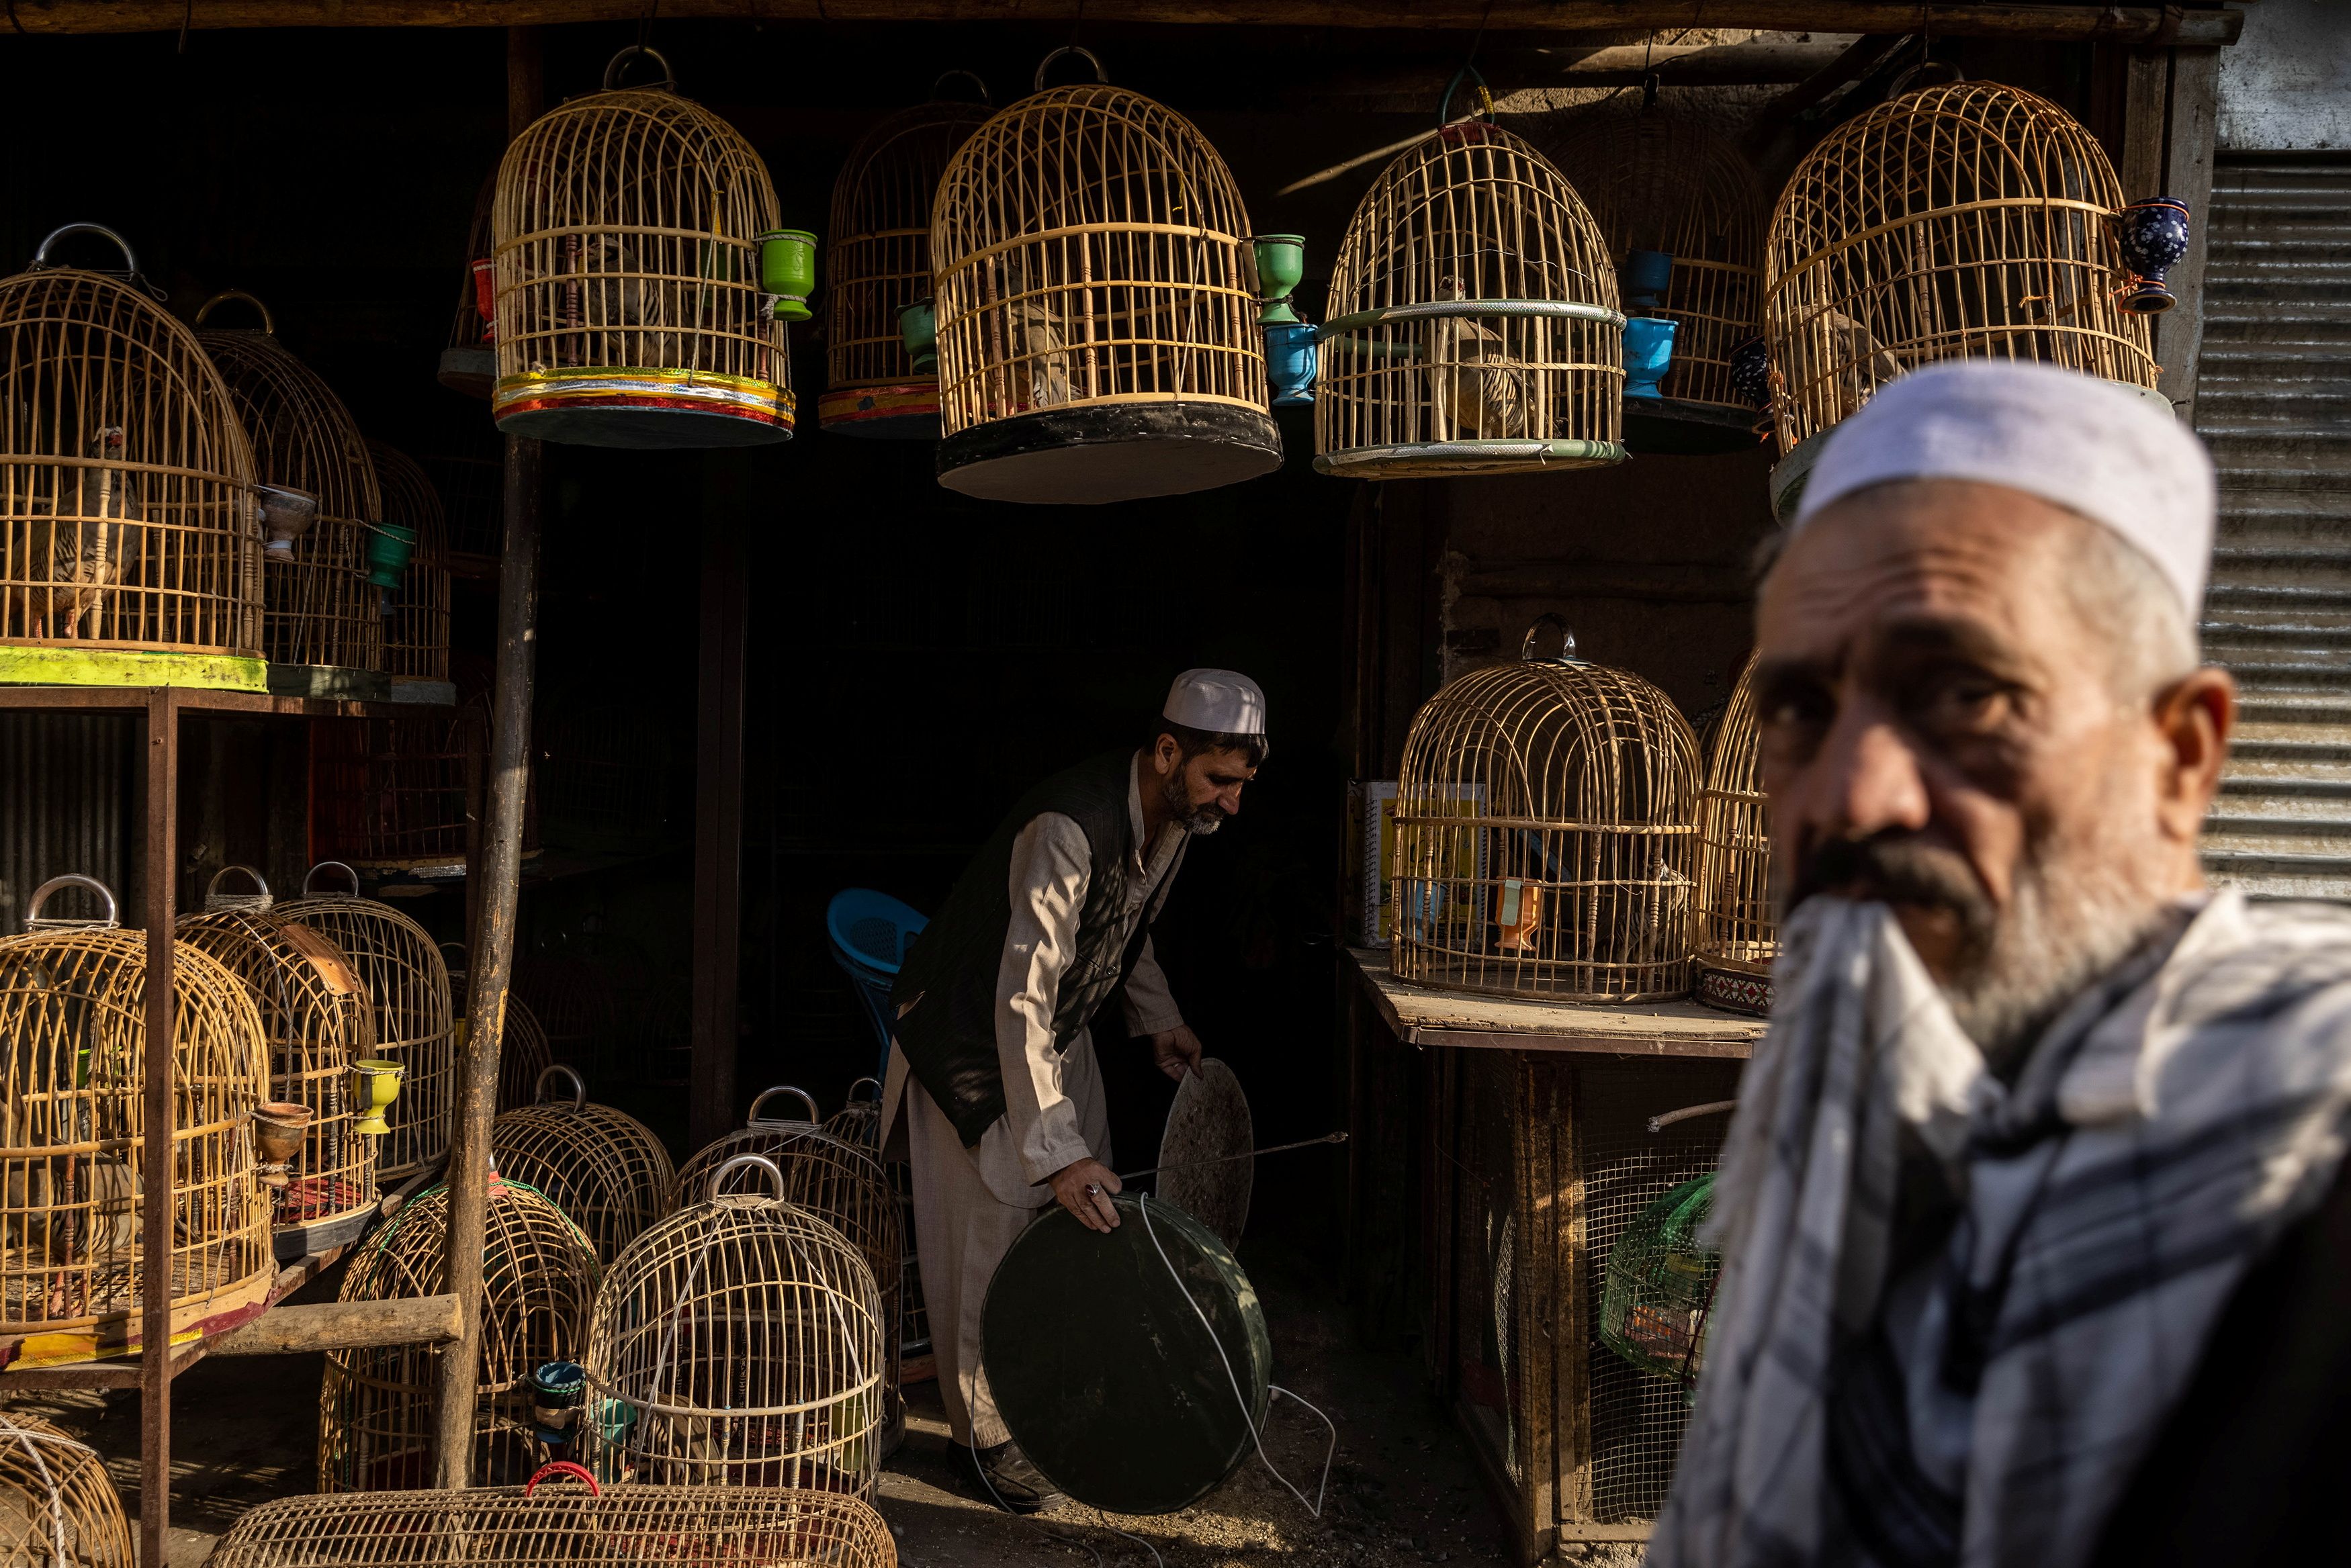 A man selling partridges cleans their cages at a market in Kabul